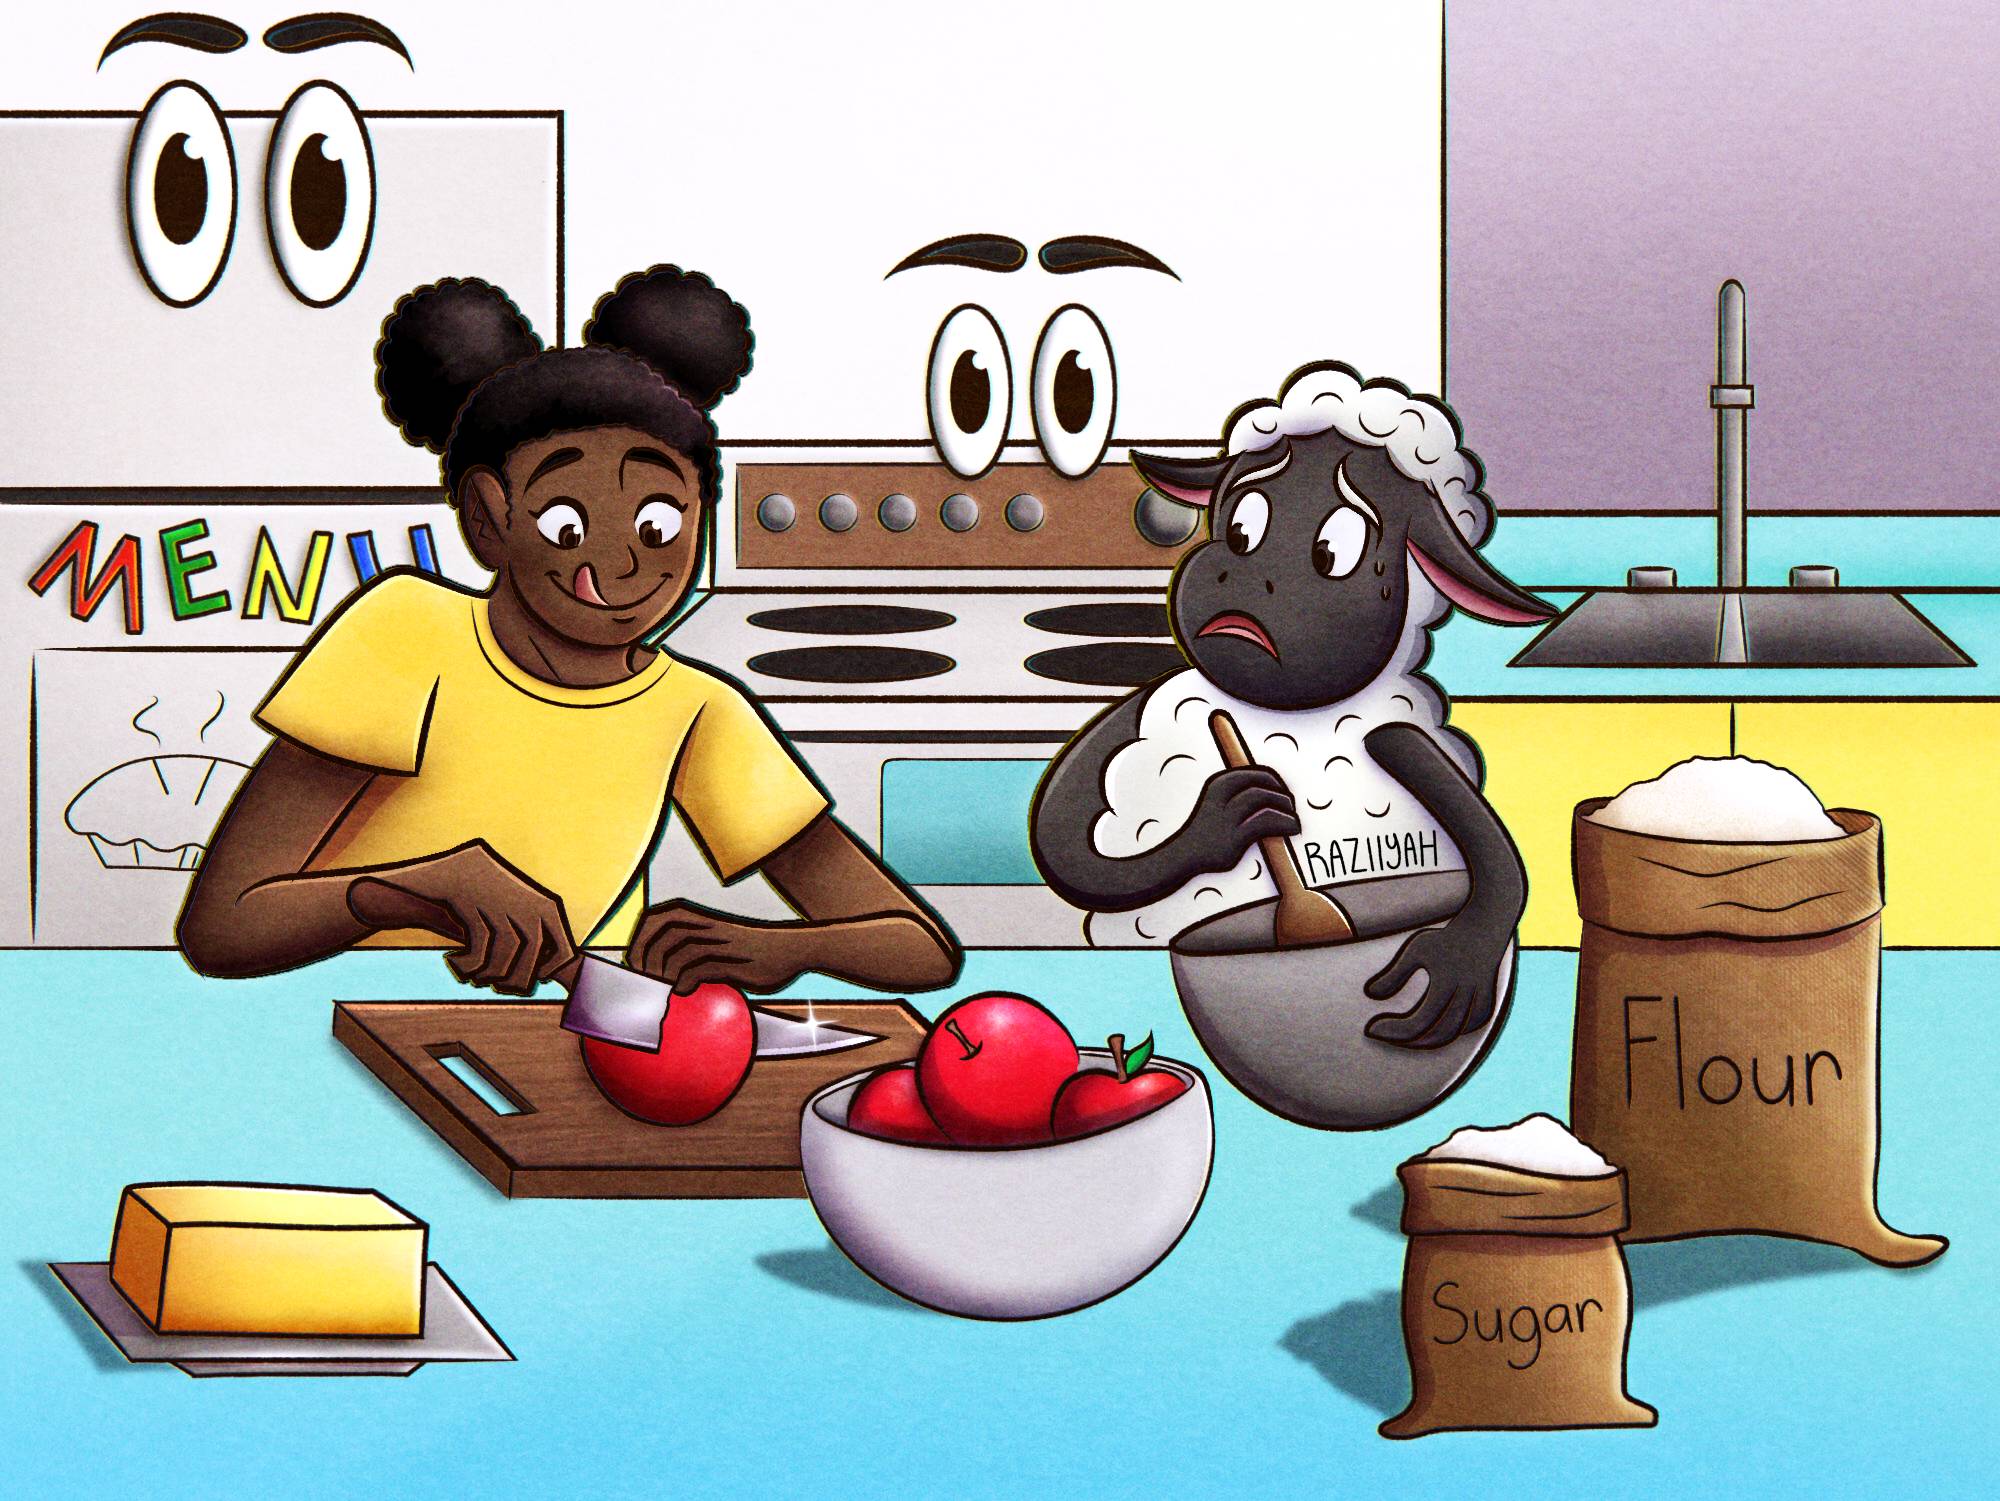 amanda the adventurer and wooly making apple pie by Raziyah on